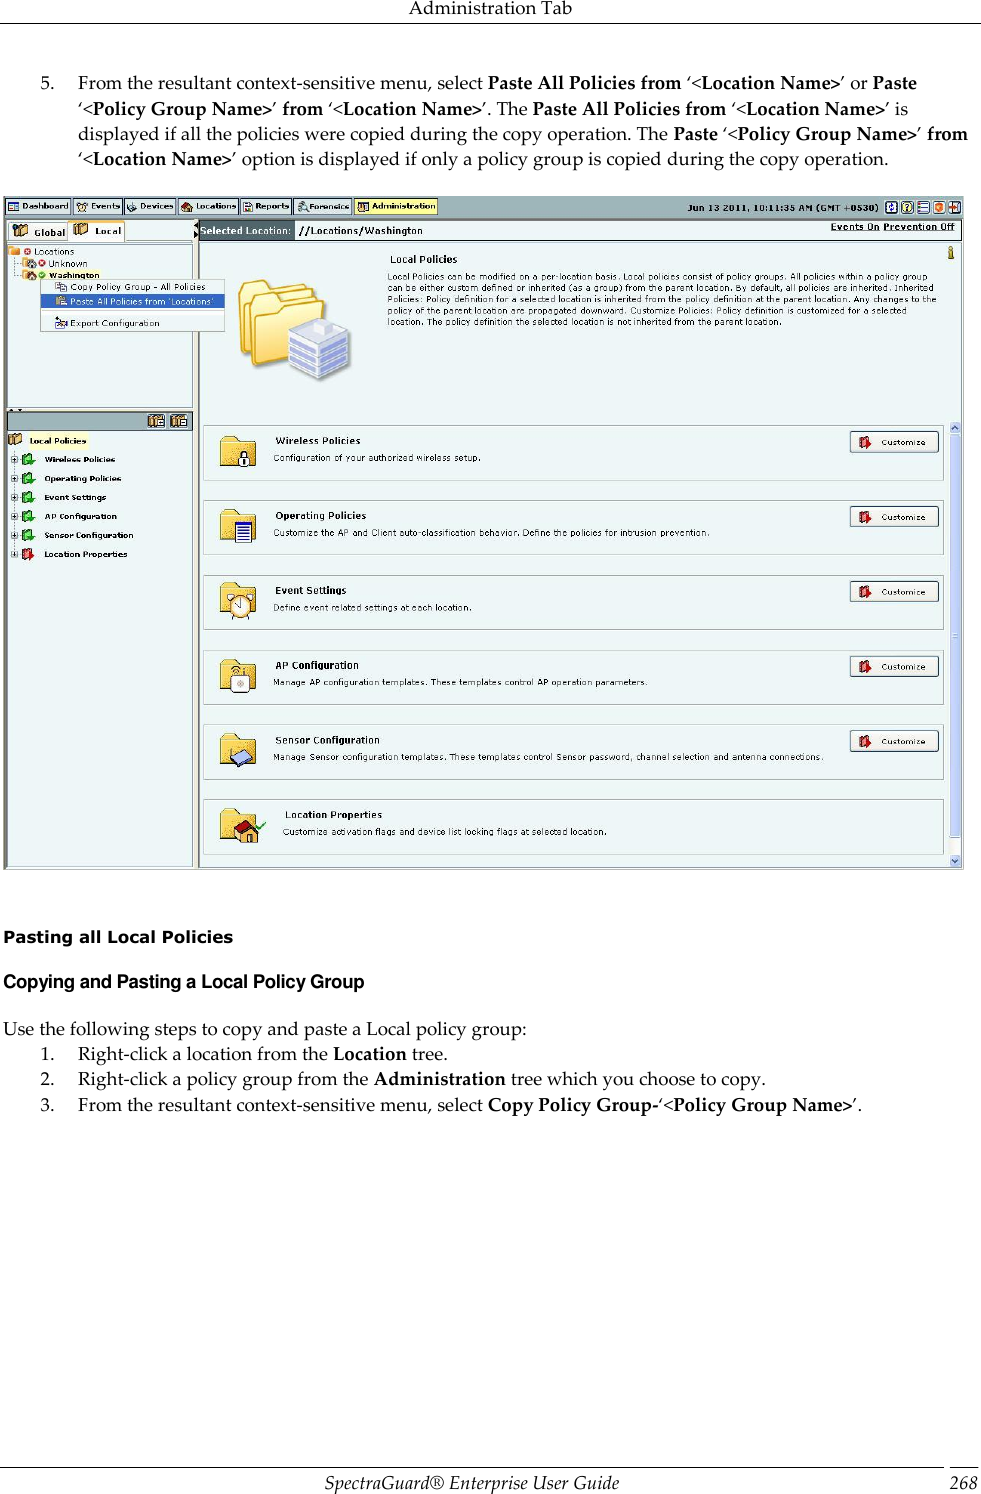 Administration Tab SpectraGuard®  Enterprise User Guide 268 5. From the resultant context-sensitive menu, select Paste All Policies from ‘&lt;Location Name&gt;’ or Paste ‘&lt;Policy Group Name&gt;’ from ‘&lt;Location Name&gt;’. The Paste All Policies from ‘&lt;Location Name&gt;’ is displayed if all the policies were copied during the copy operation. The Paste ‘&lt;Policy Group Name&gt;’ from ‘&lt;Location Name&gt;’ option is displayed if only a policy group is copied during the copy operation.        Pasting all Local Policies Copying and Pasting a Local Policy Group Use the following steps to copy and paste a Local policy group: 1. Right-click a location from the Location tree. 2. Right-click a policy group from the Administration tree which you choose to copy. 3. From the resultant context-sensitive menu, select Copy Policy Group-‘&lt;Policy Group Name&gt;’. 